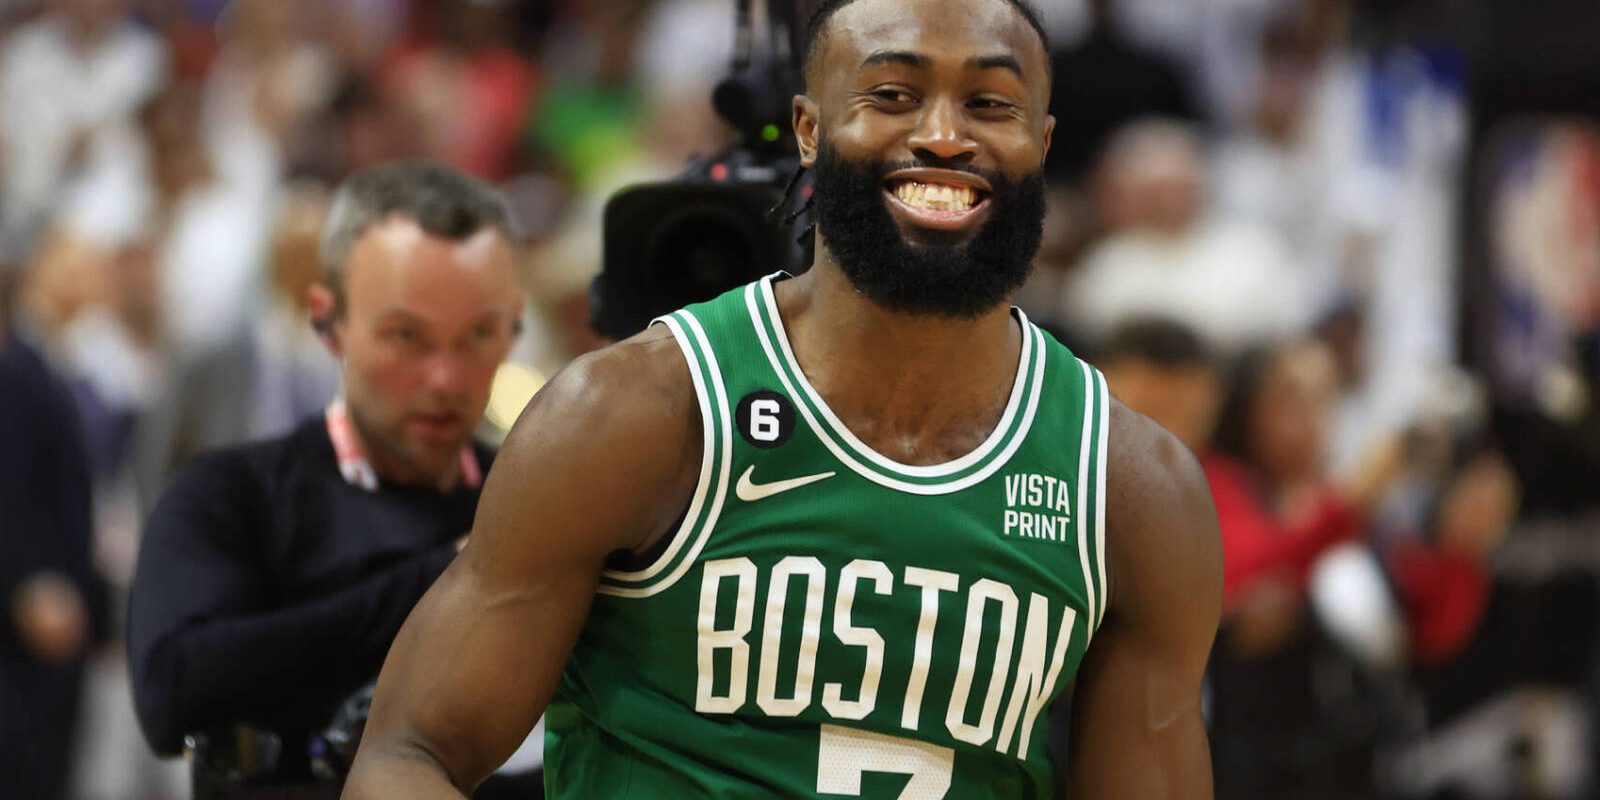 MIAMI, FLORIDA - MAY 27: Jaylen Brown #7 of the Boston Celtics reacts to defeating the Miami Heat 104-103 in game six of the Eastern Conference Finals at Kaseya Center on May 27, 2023 in Miami, Florida. NOTE TO USER: User expressly acknowledges and agrees that, by downloading and or using this photograph, User is consenting to the terms and conditions of the Getty Images License Agreement. (Photo by Mike Ehrmann/Getty Images)